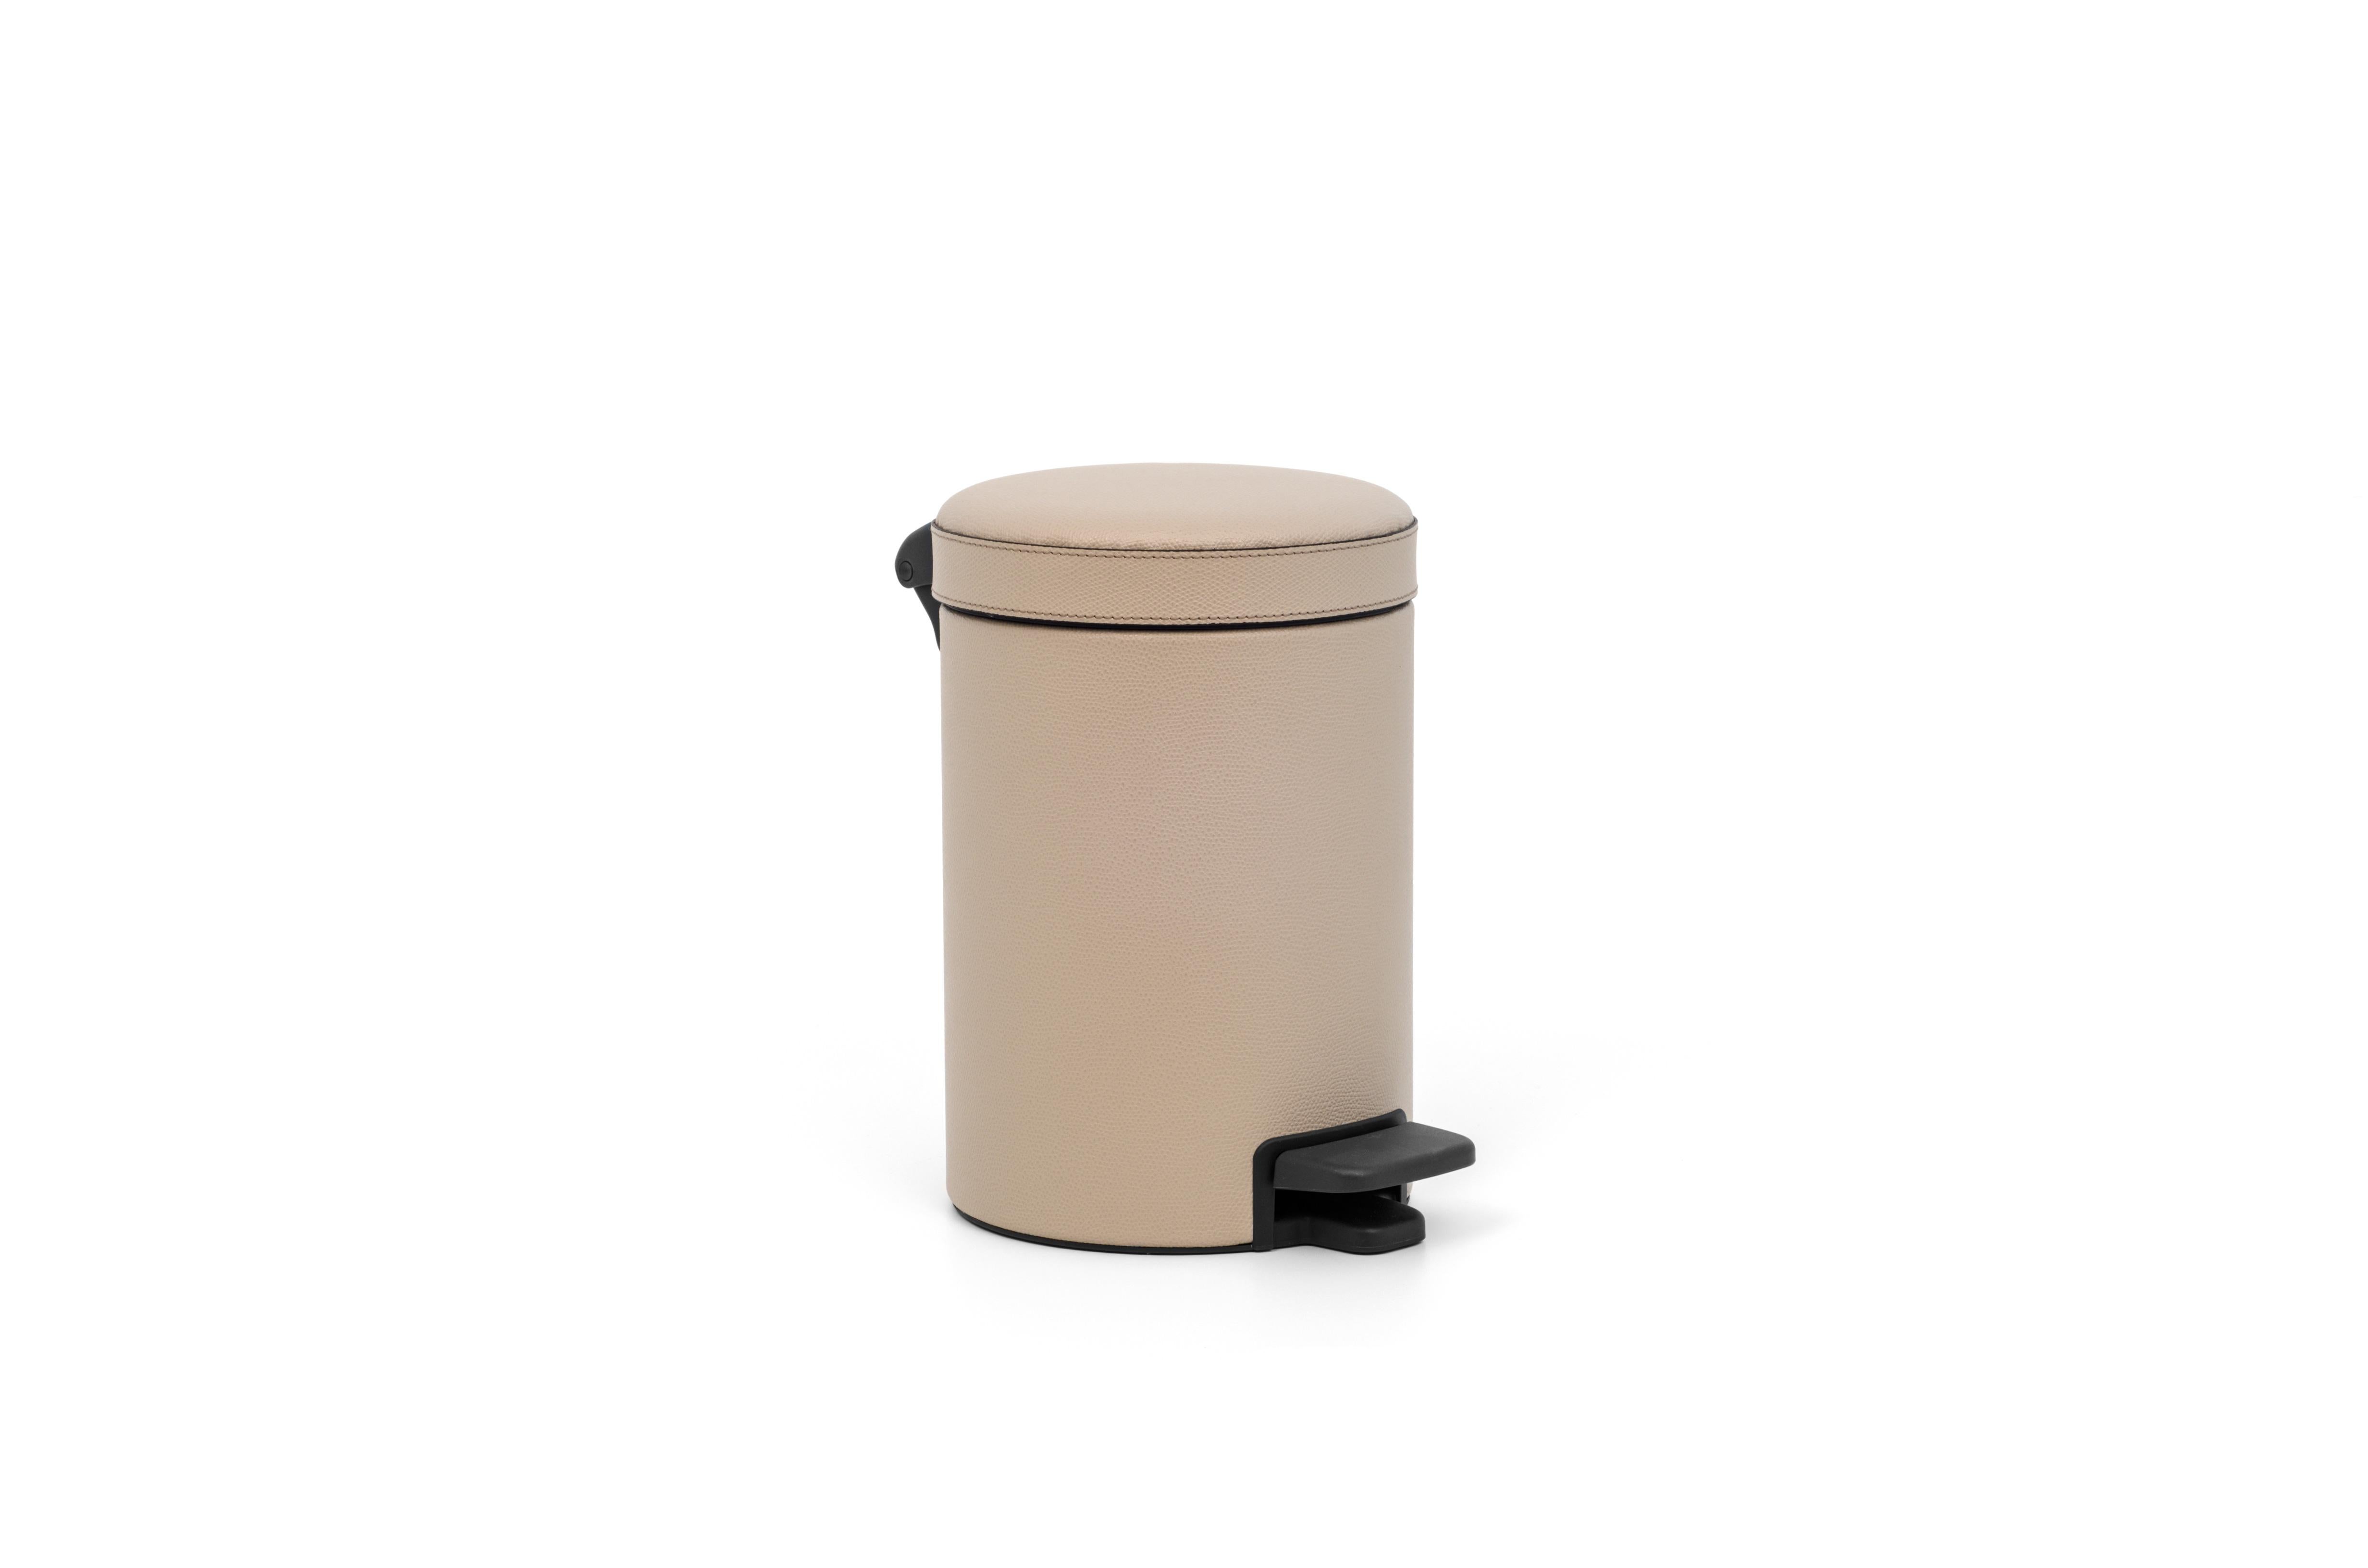 A chic and sleek aesthetic for our wastebasket with a black pedal. 

Available with a 3 and 5 liter capacity and a soft closing function that will avoid any loud noises. Finished in neutral tones leather to perfectly match with an array of